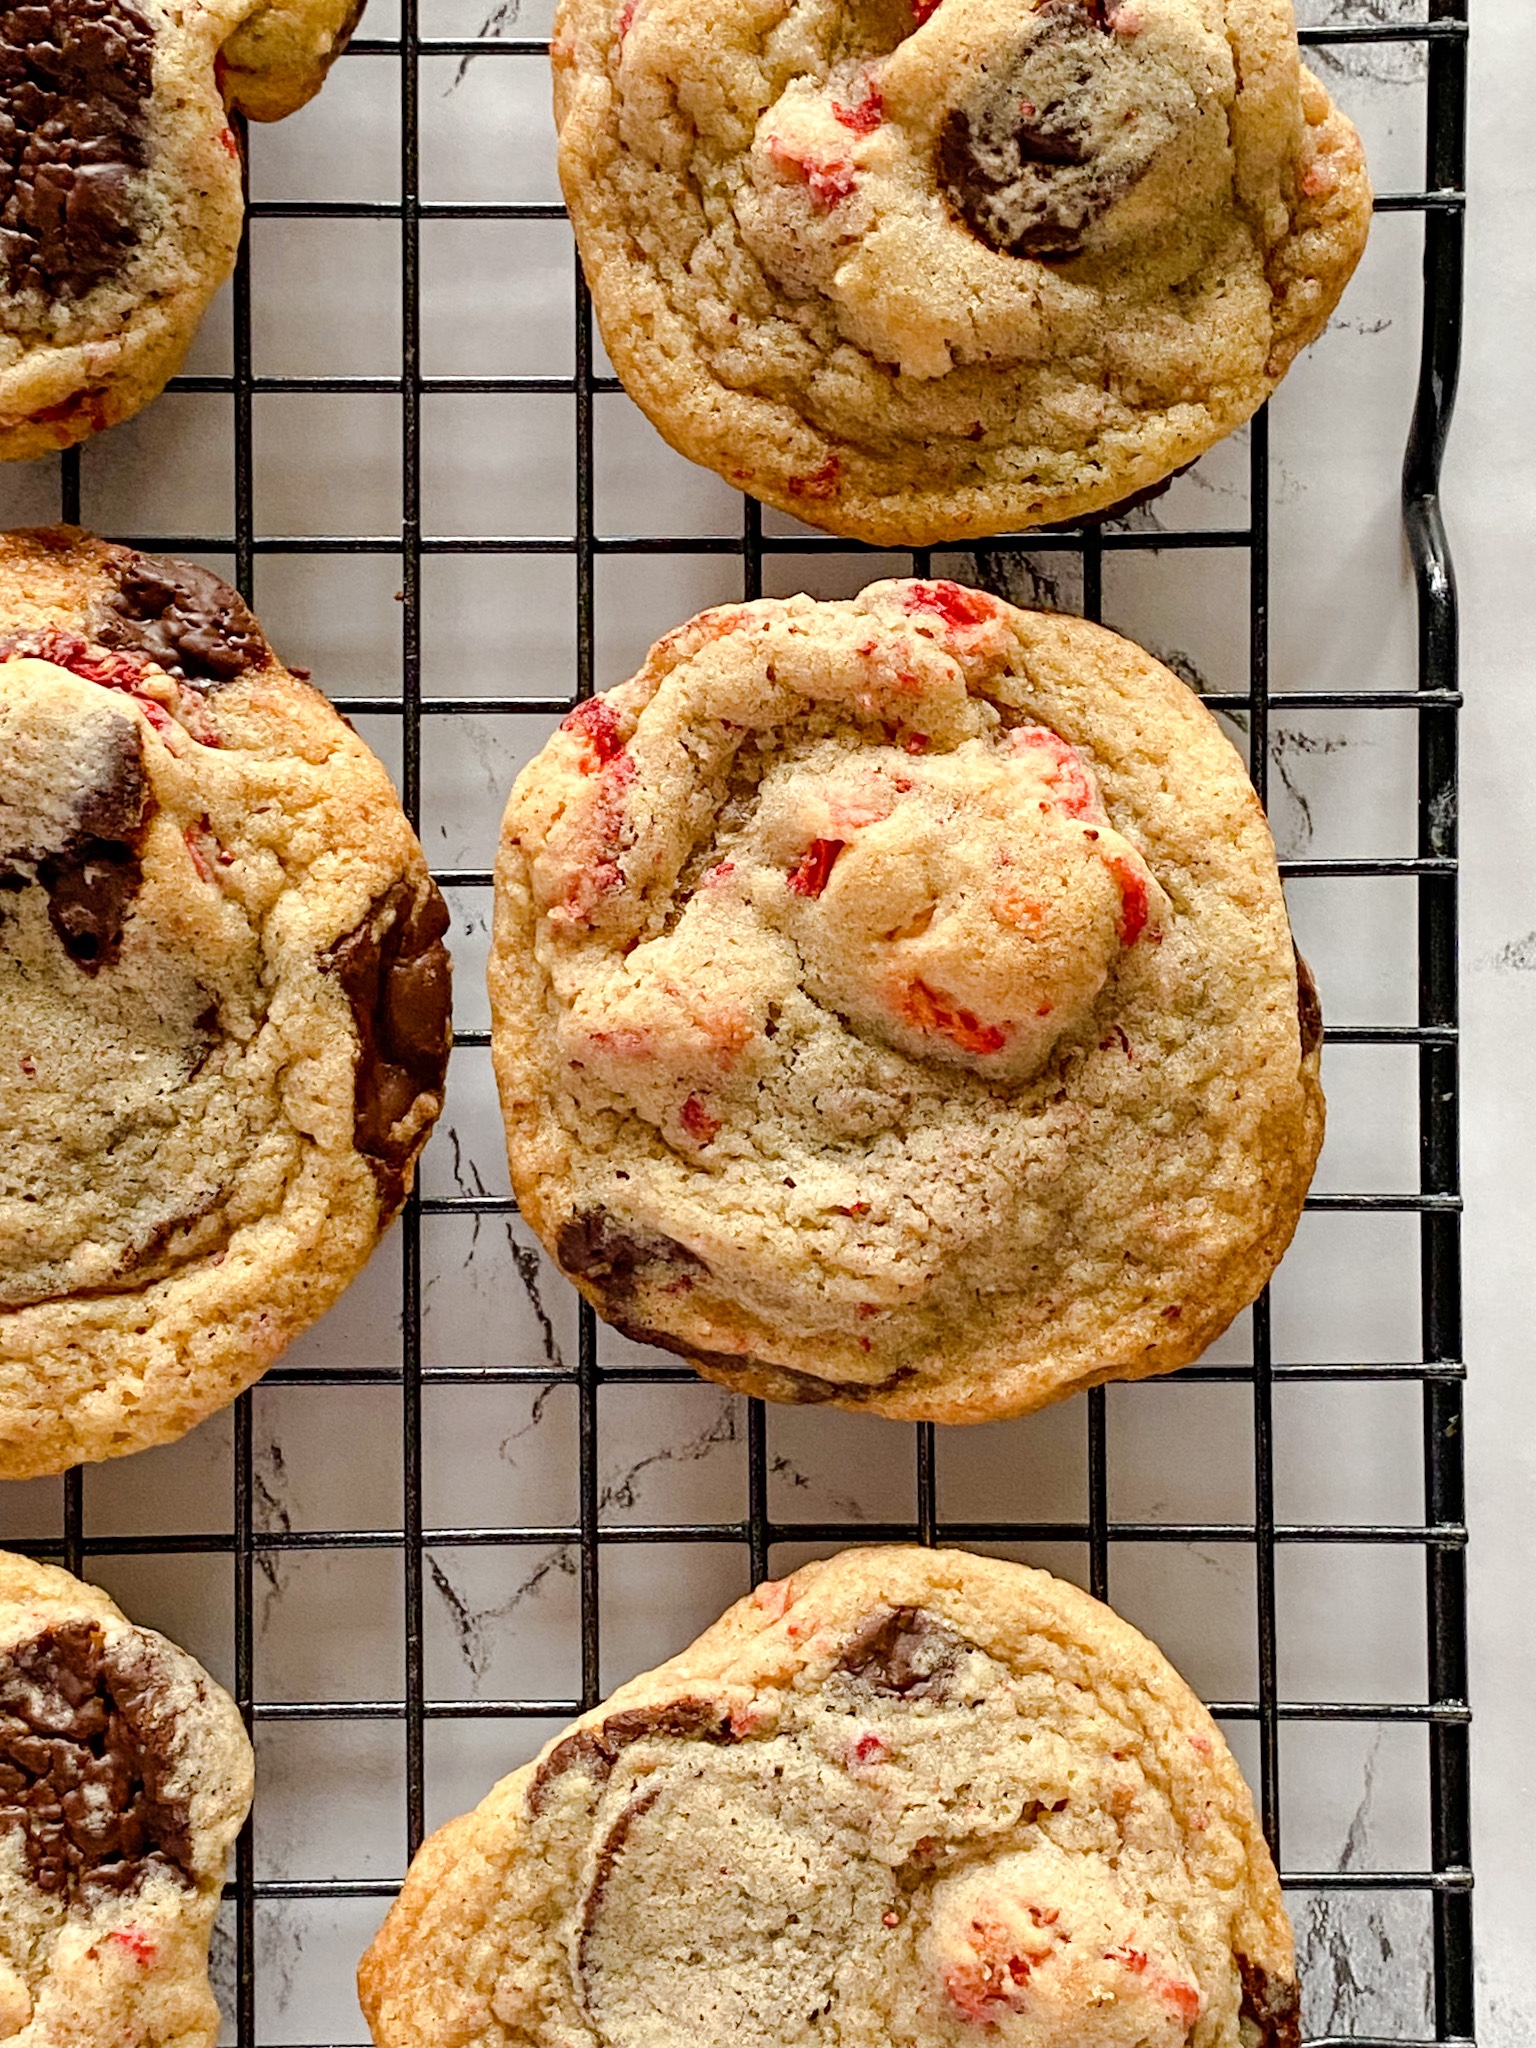 Chocolate chip cookies with strawberries mixed in sit on a cooling rack on a marble-looking surface.